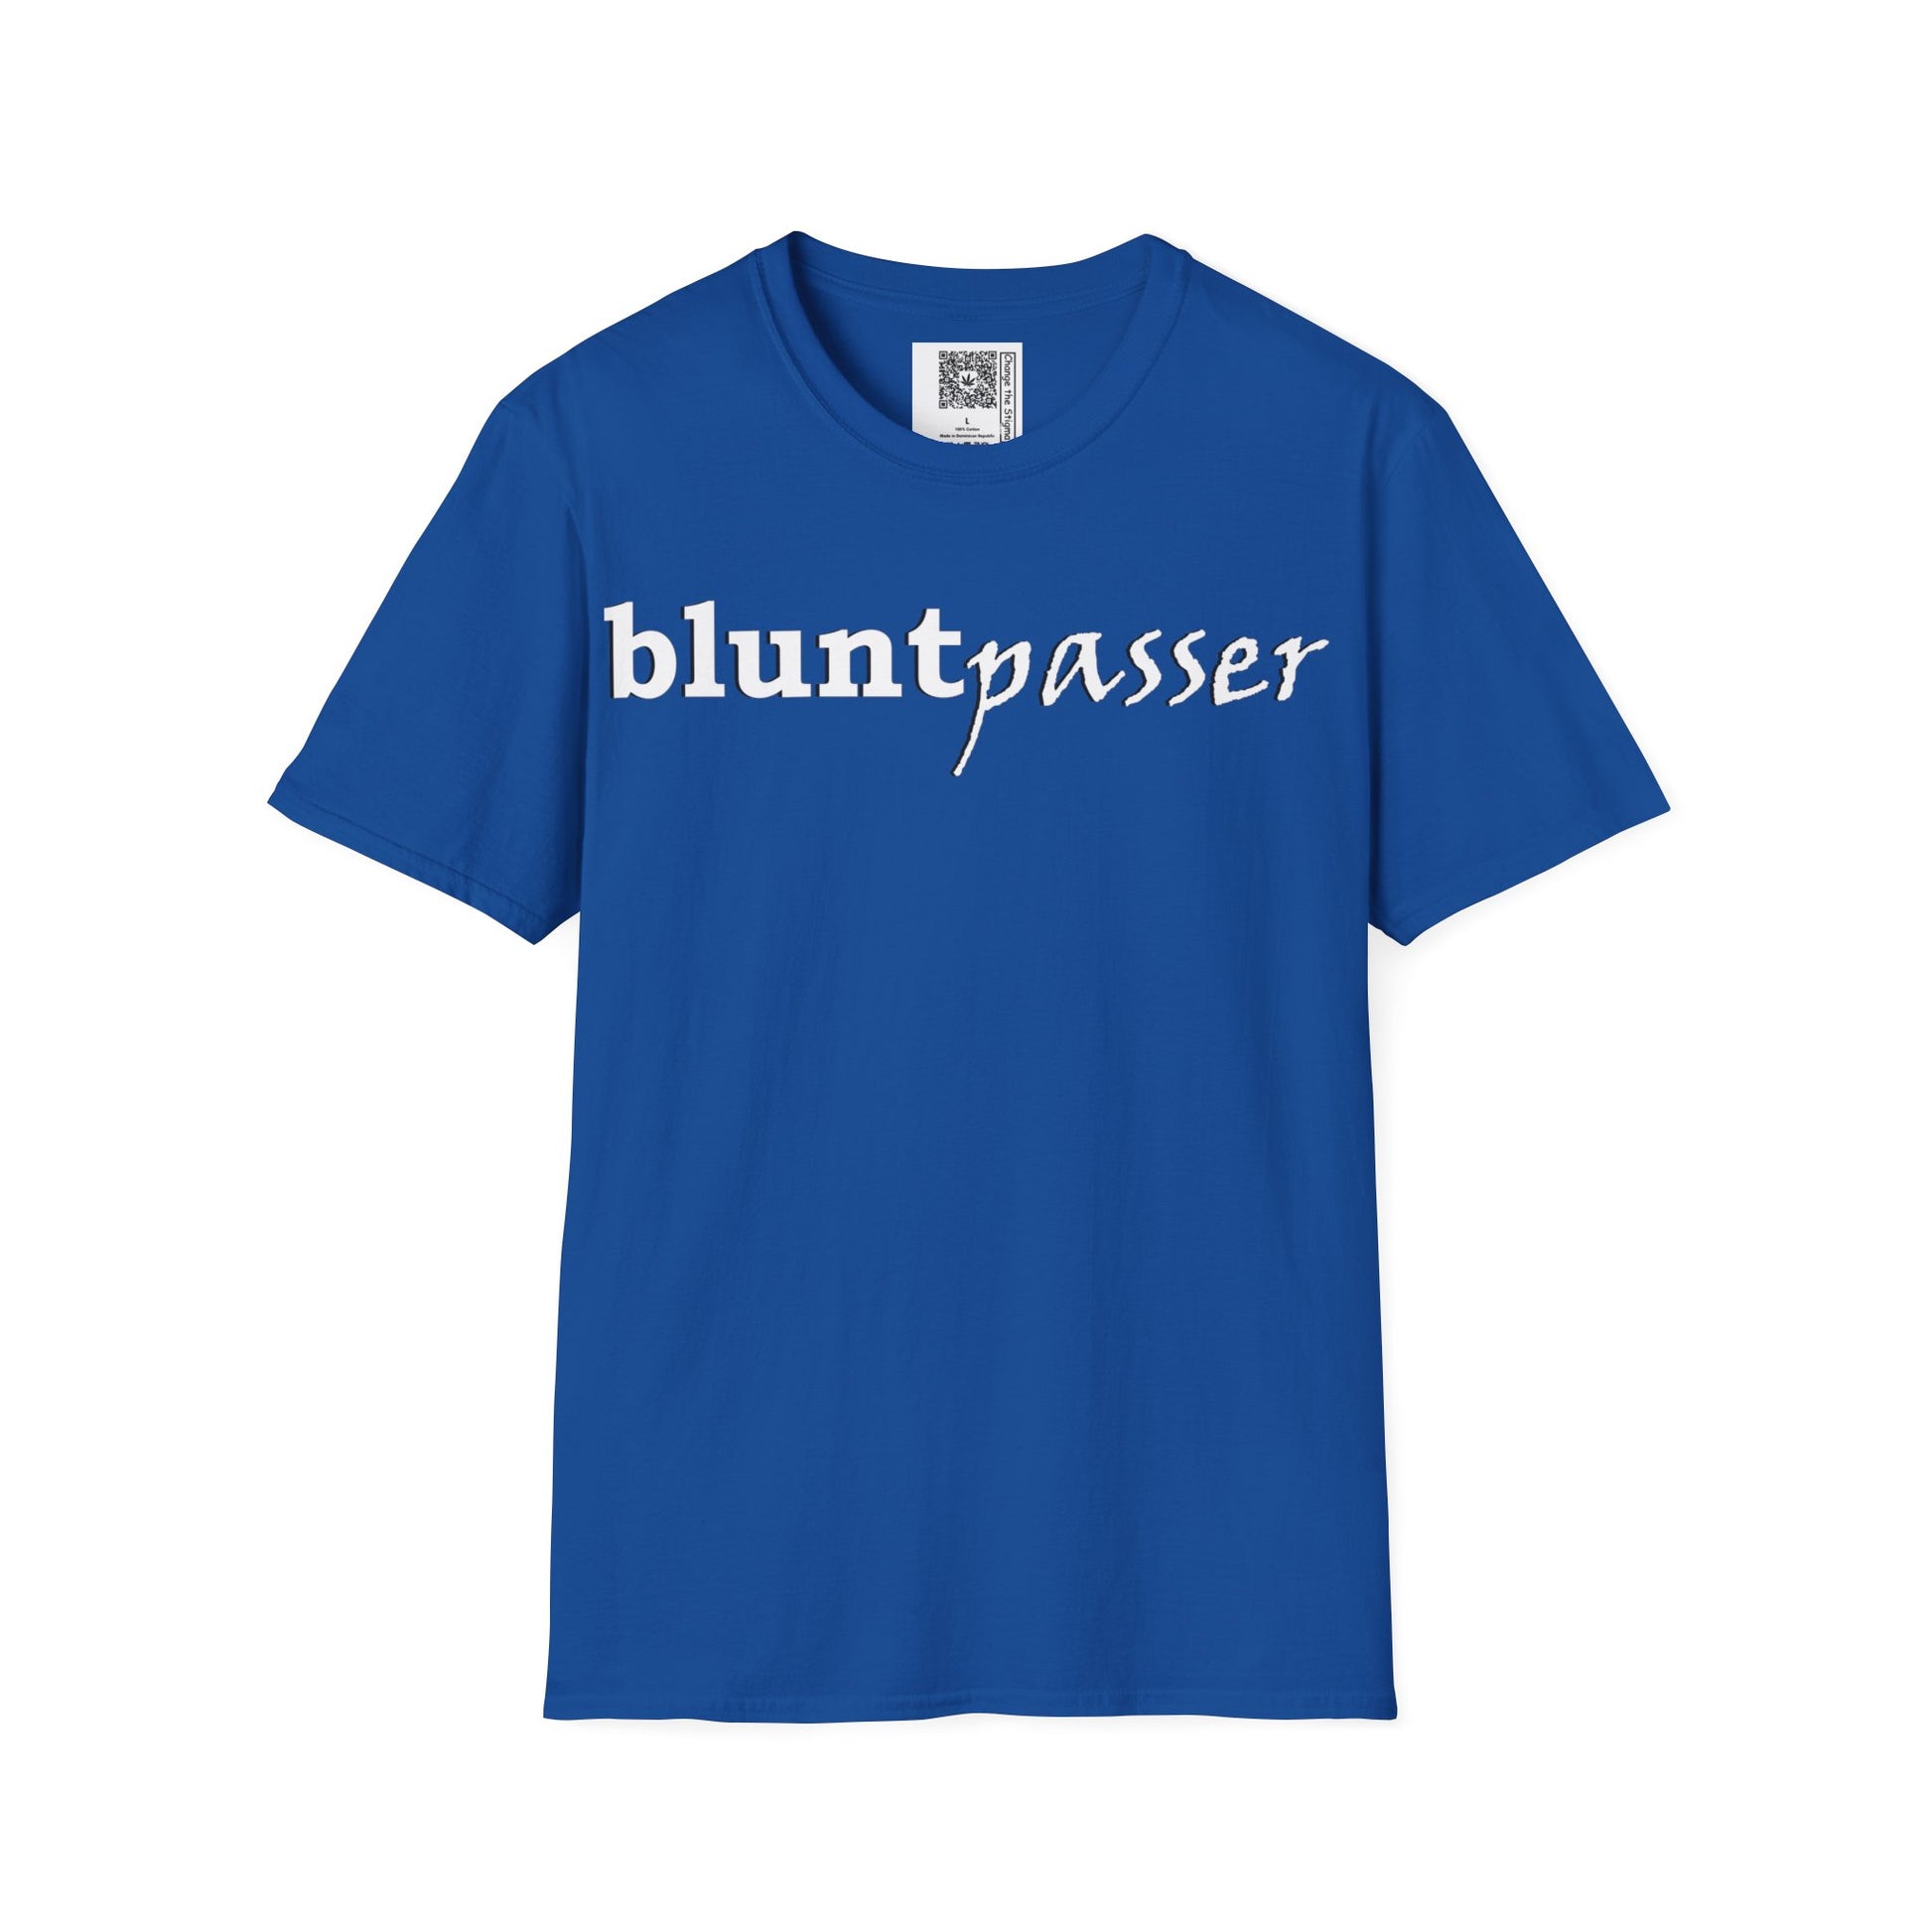 Change the Stigma, Royal color, shirt saying "blunt passer", Shirt is open displayed, Qr code is shown